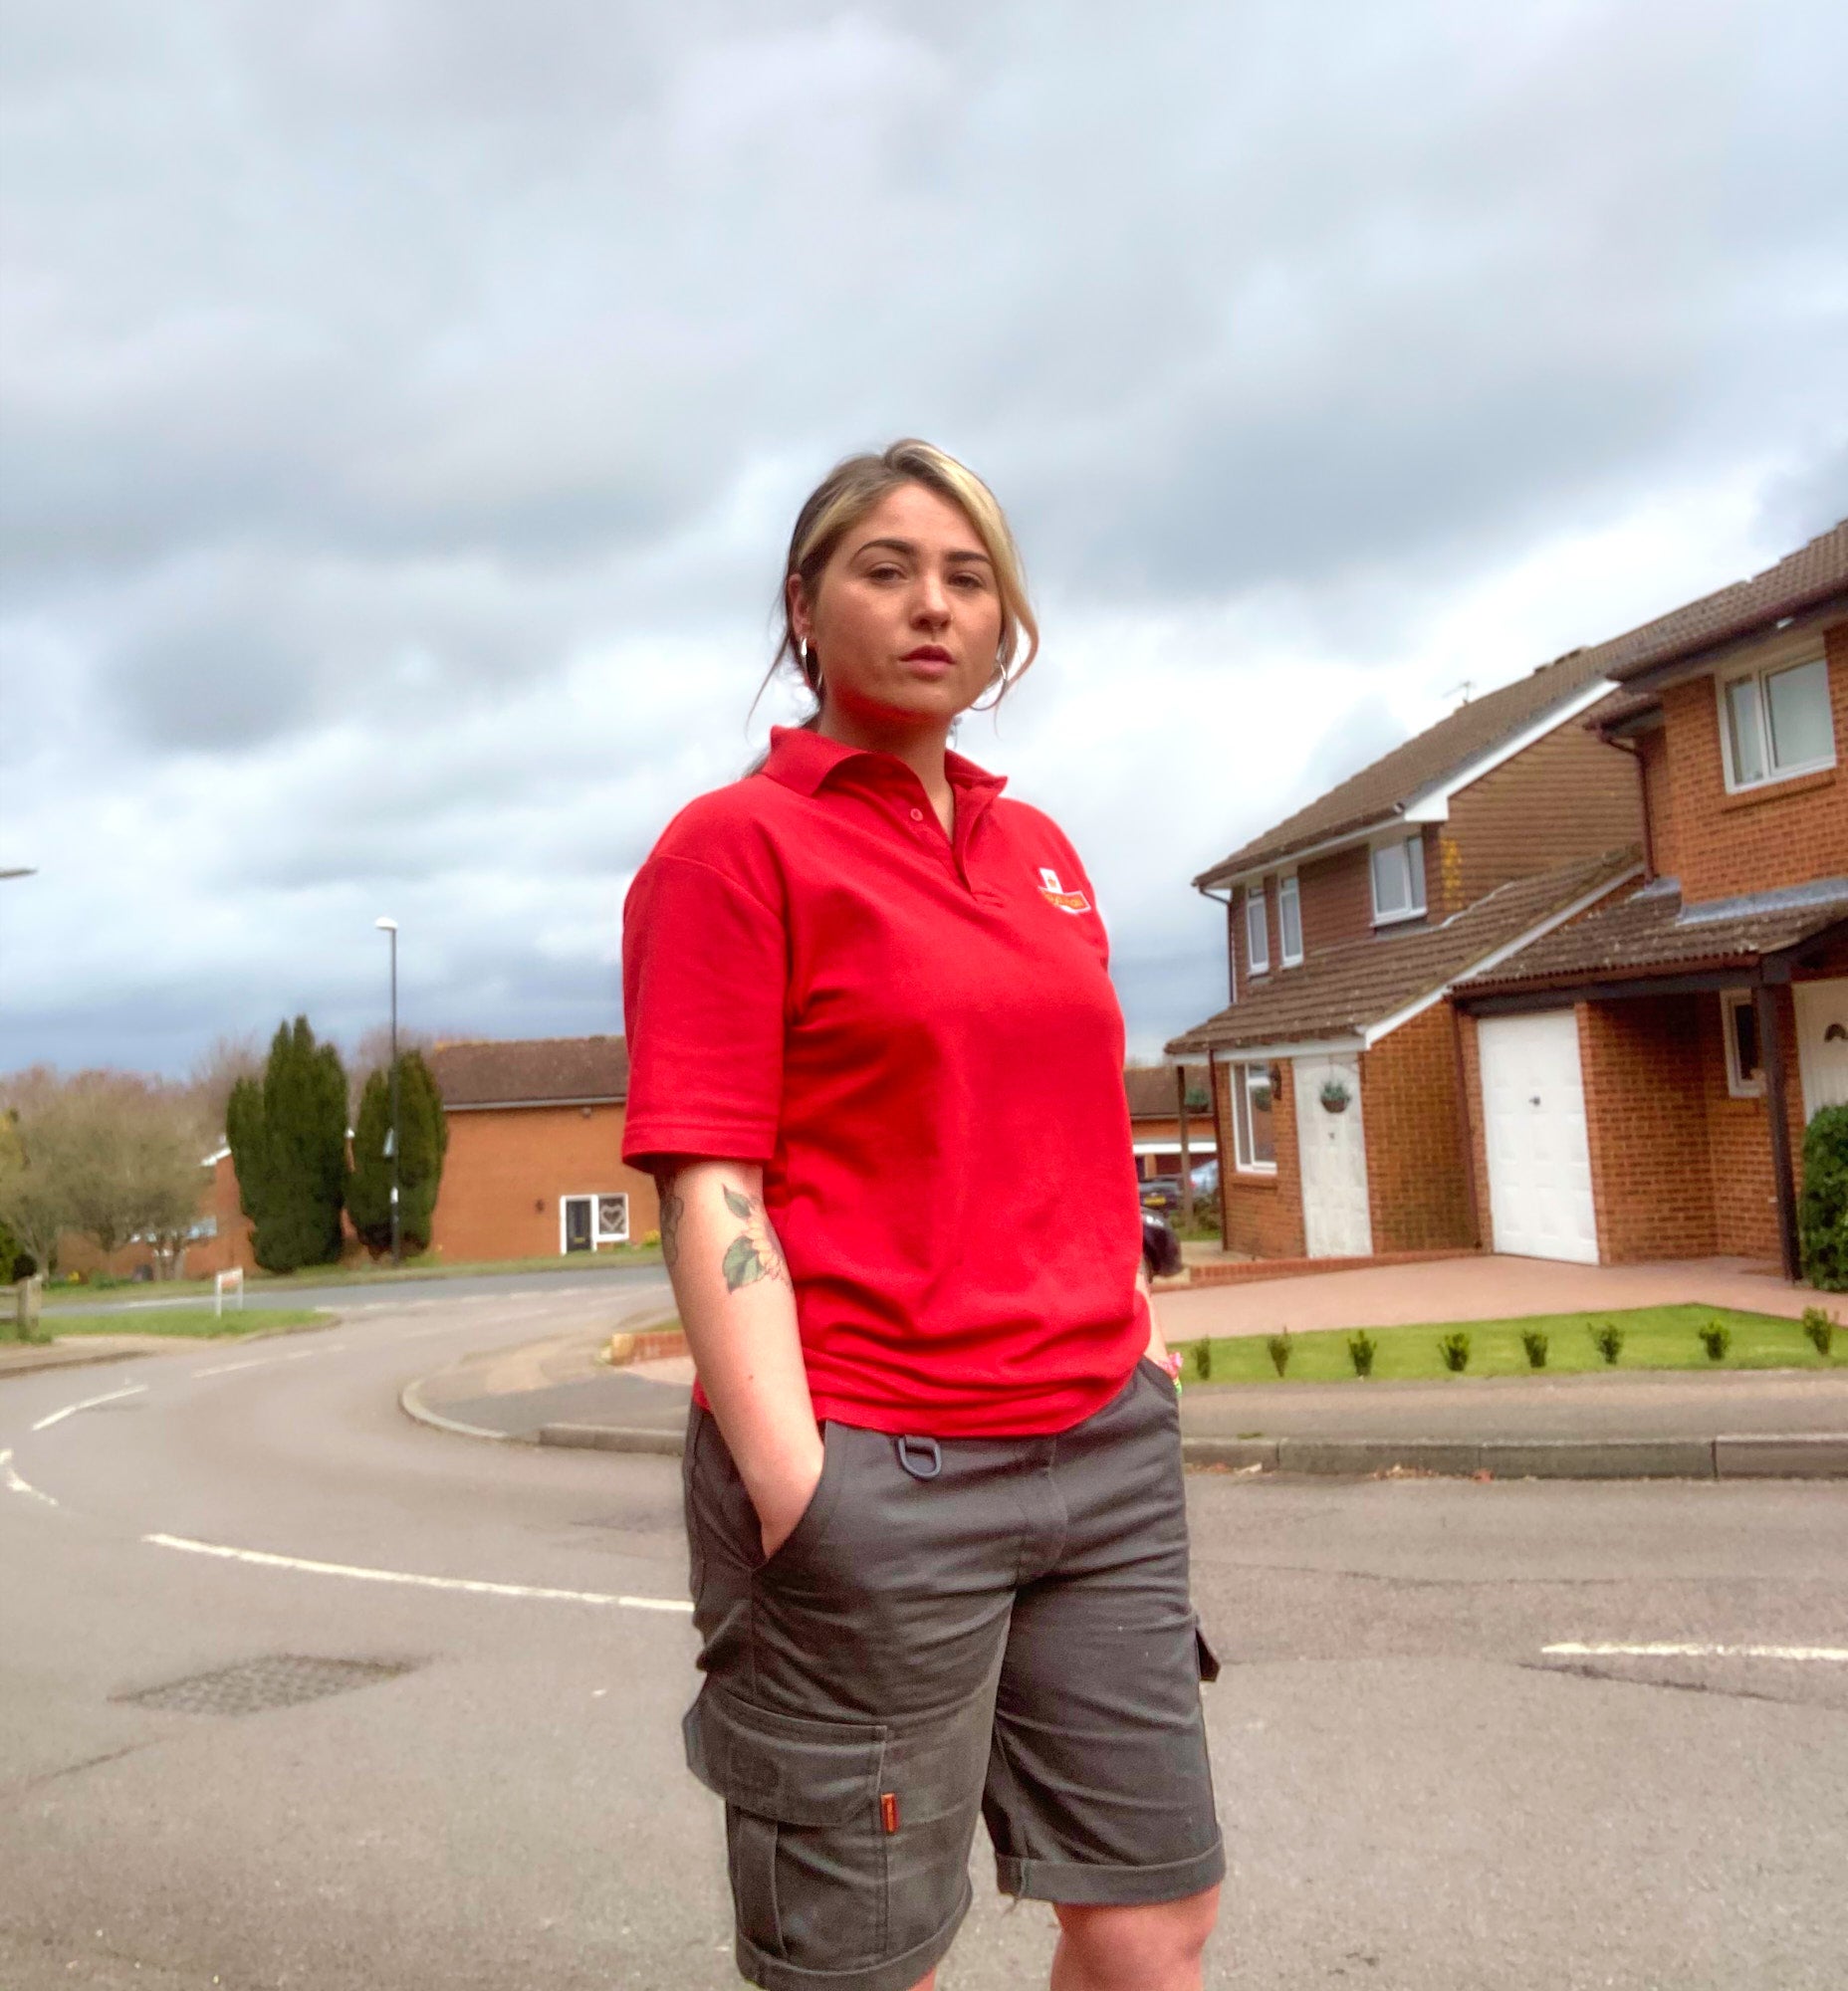 Postwoman says she routinely feels scared and in danger while doing her job